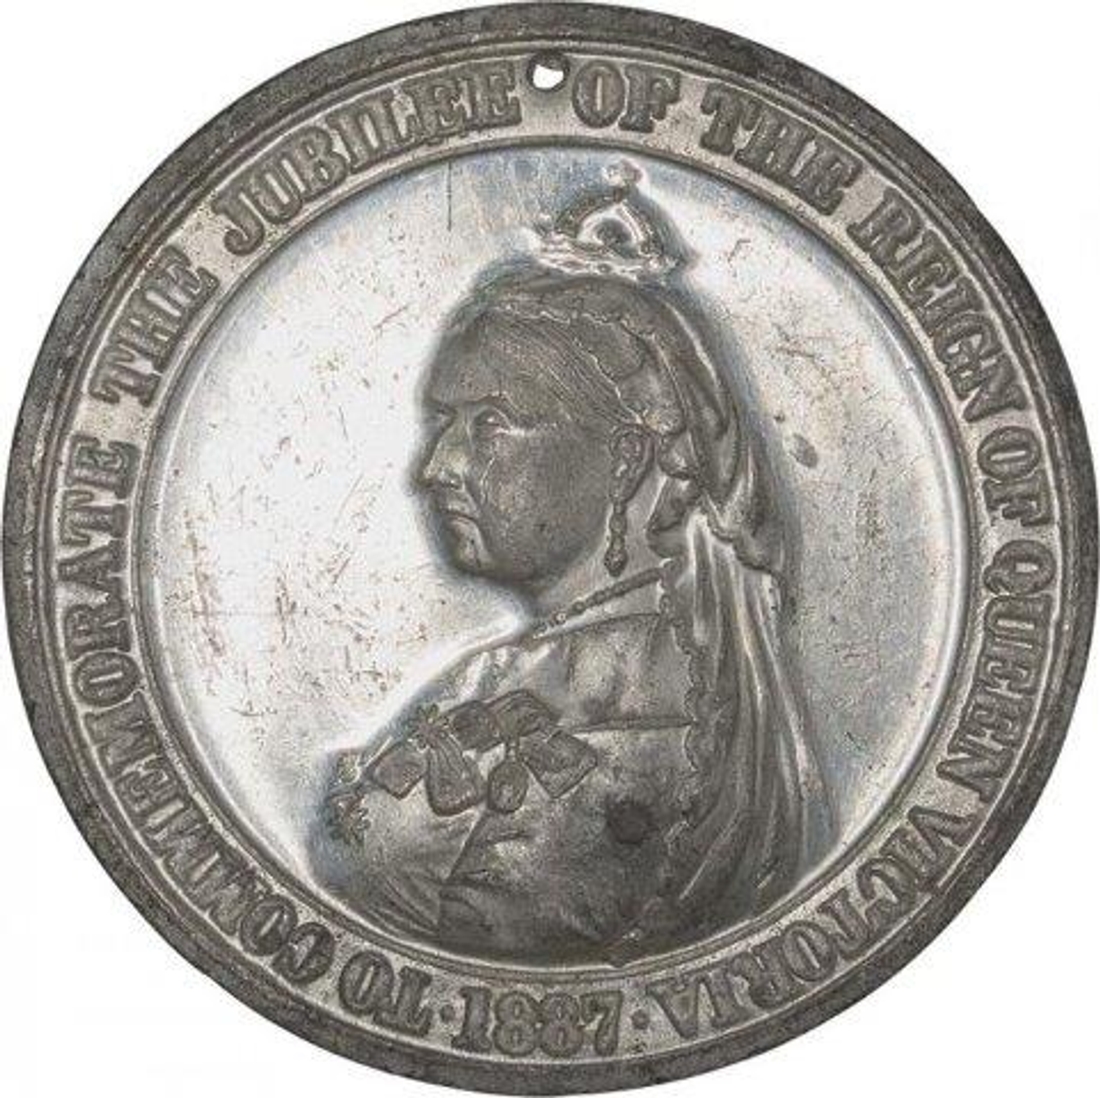 Medallion of The Jubilee Reign of Queen Victoria of 1887.